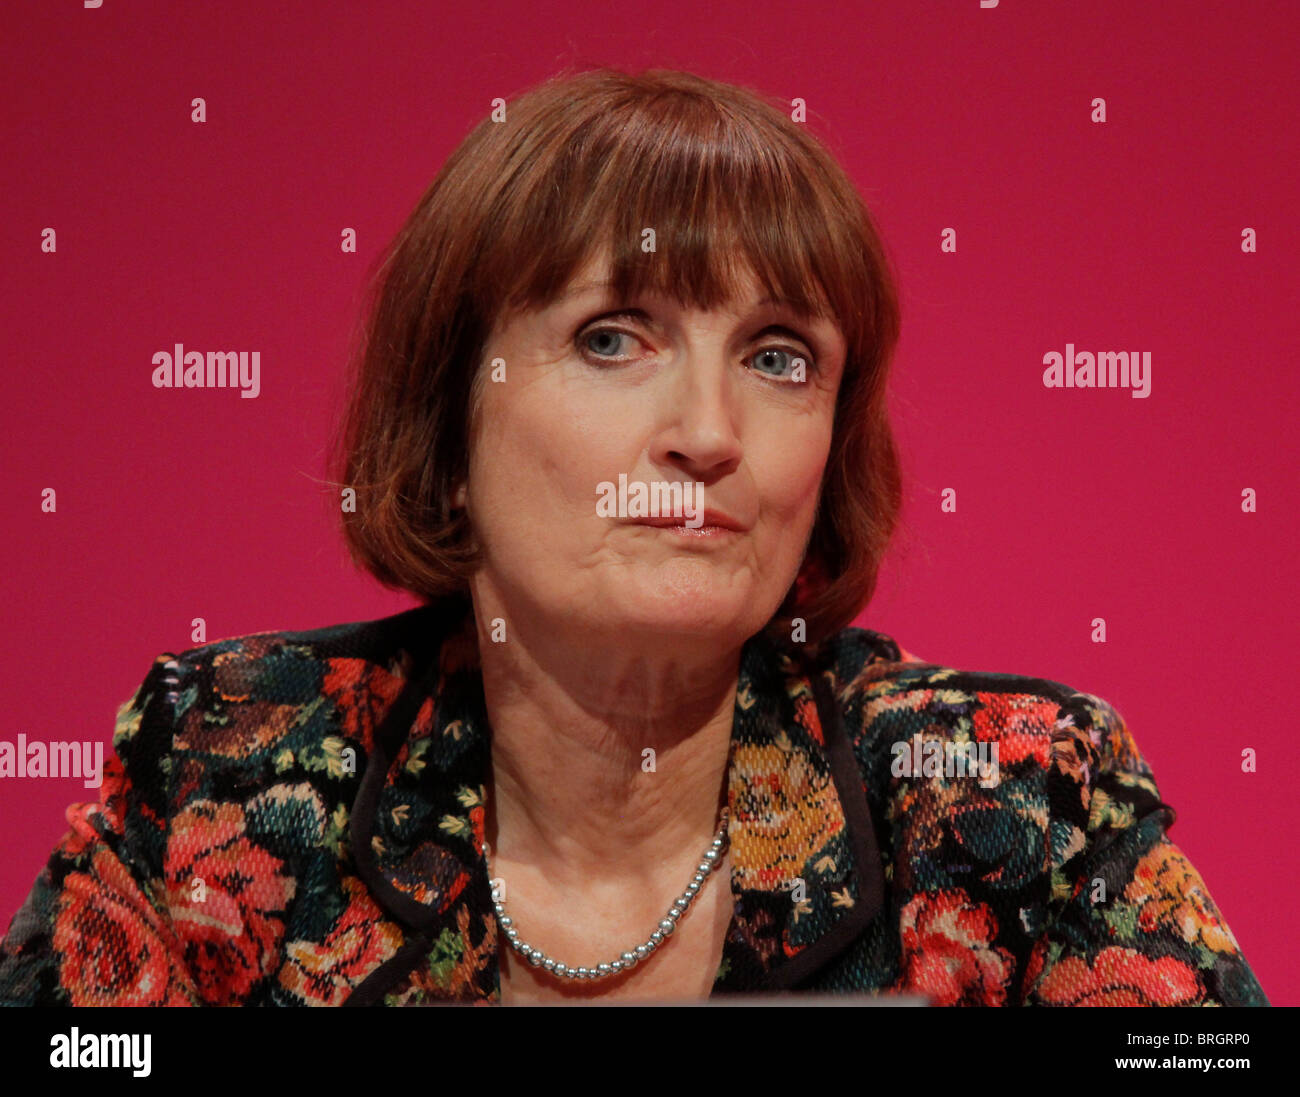 TESSA JOWELL MP LABOUR PARTY 29 September 2010 MANCHESTER CENTRAL MANCHESTER ENGLAND Stock Photo